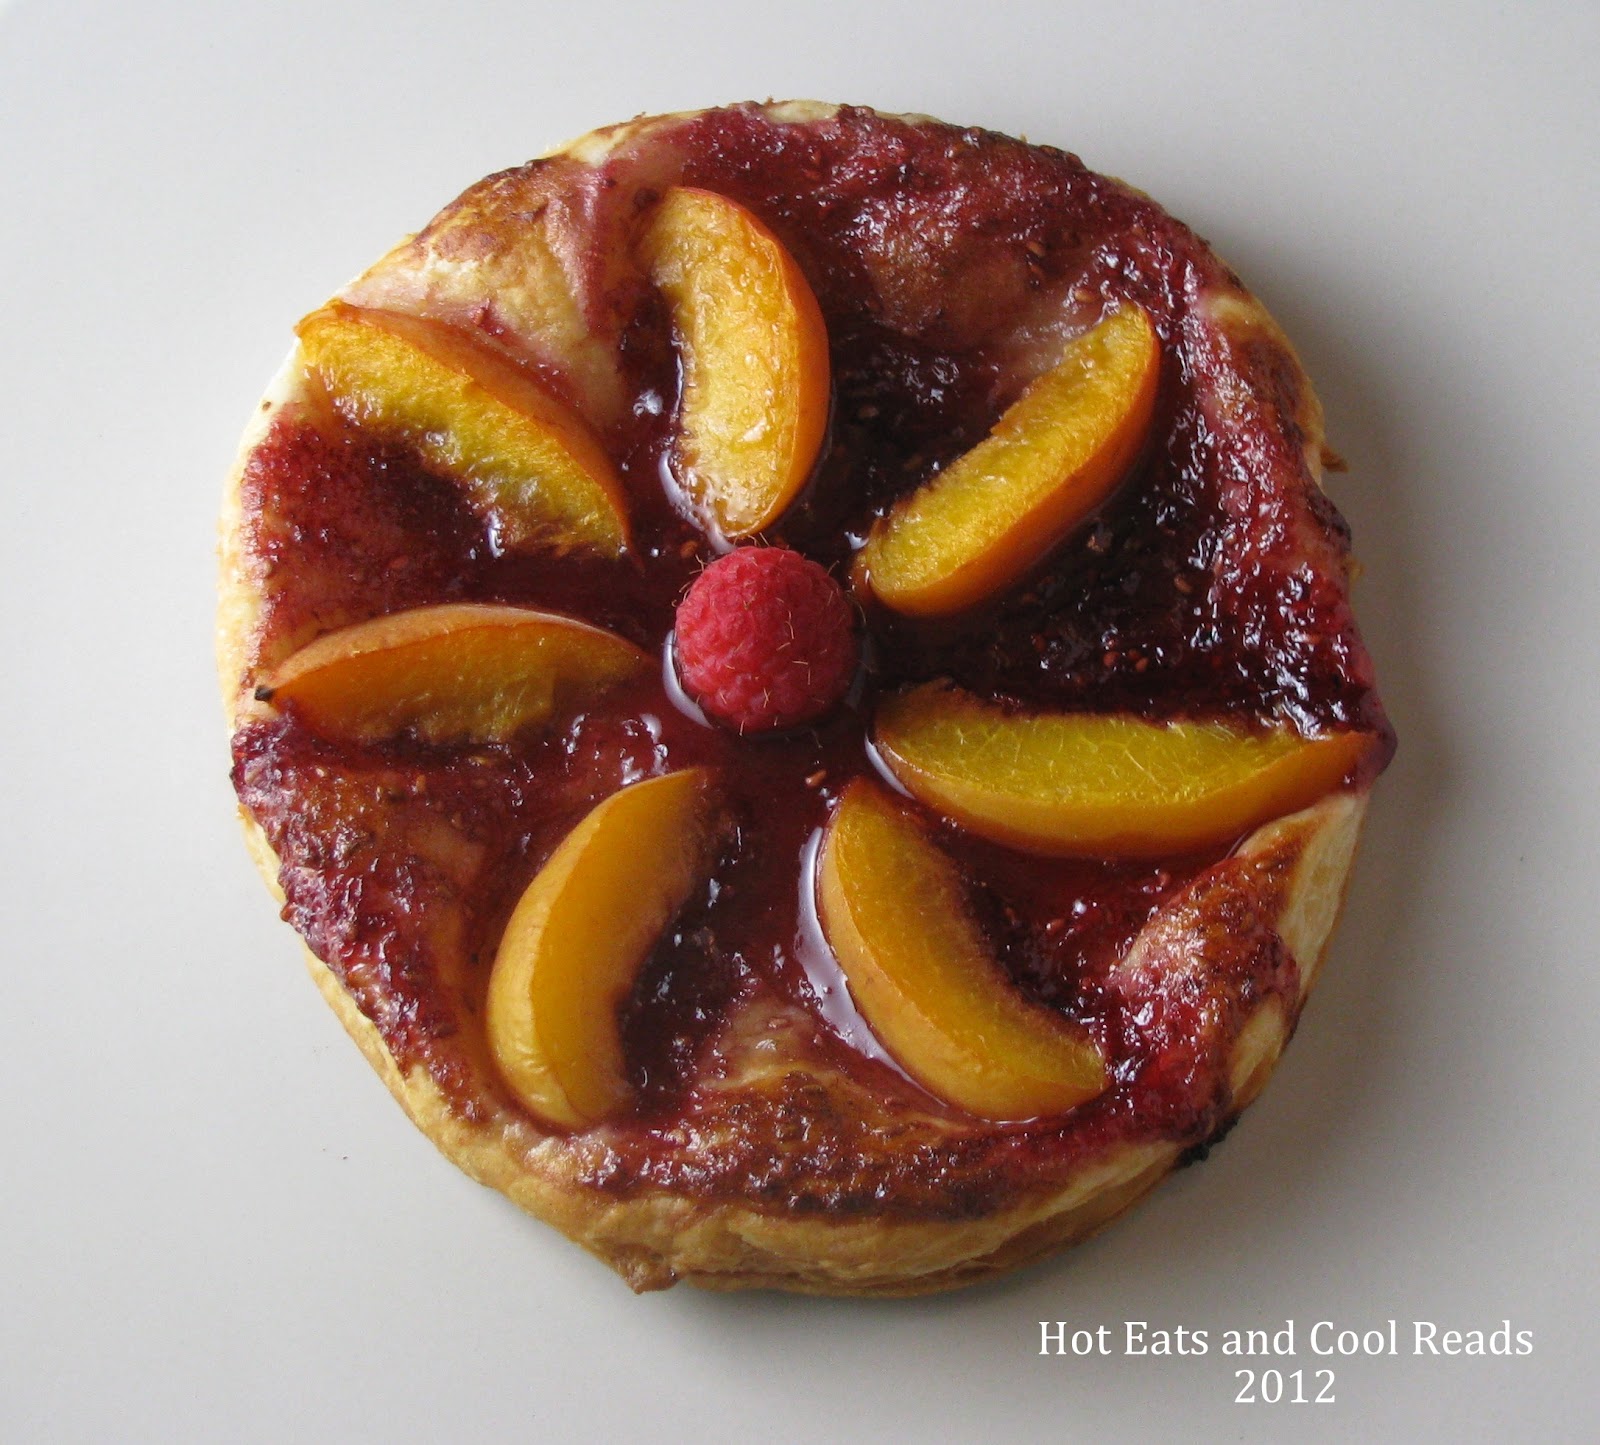 Hot Eats And Cool Reads Apricot Fruit Tart Dessert Recipe From The Disney Channel